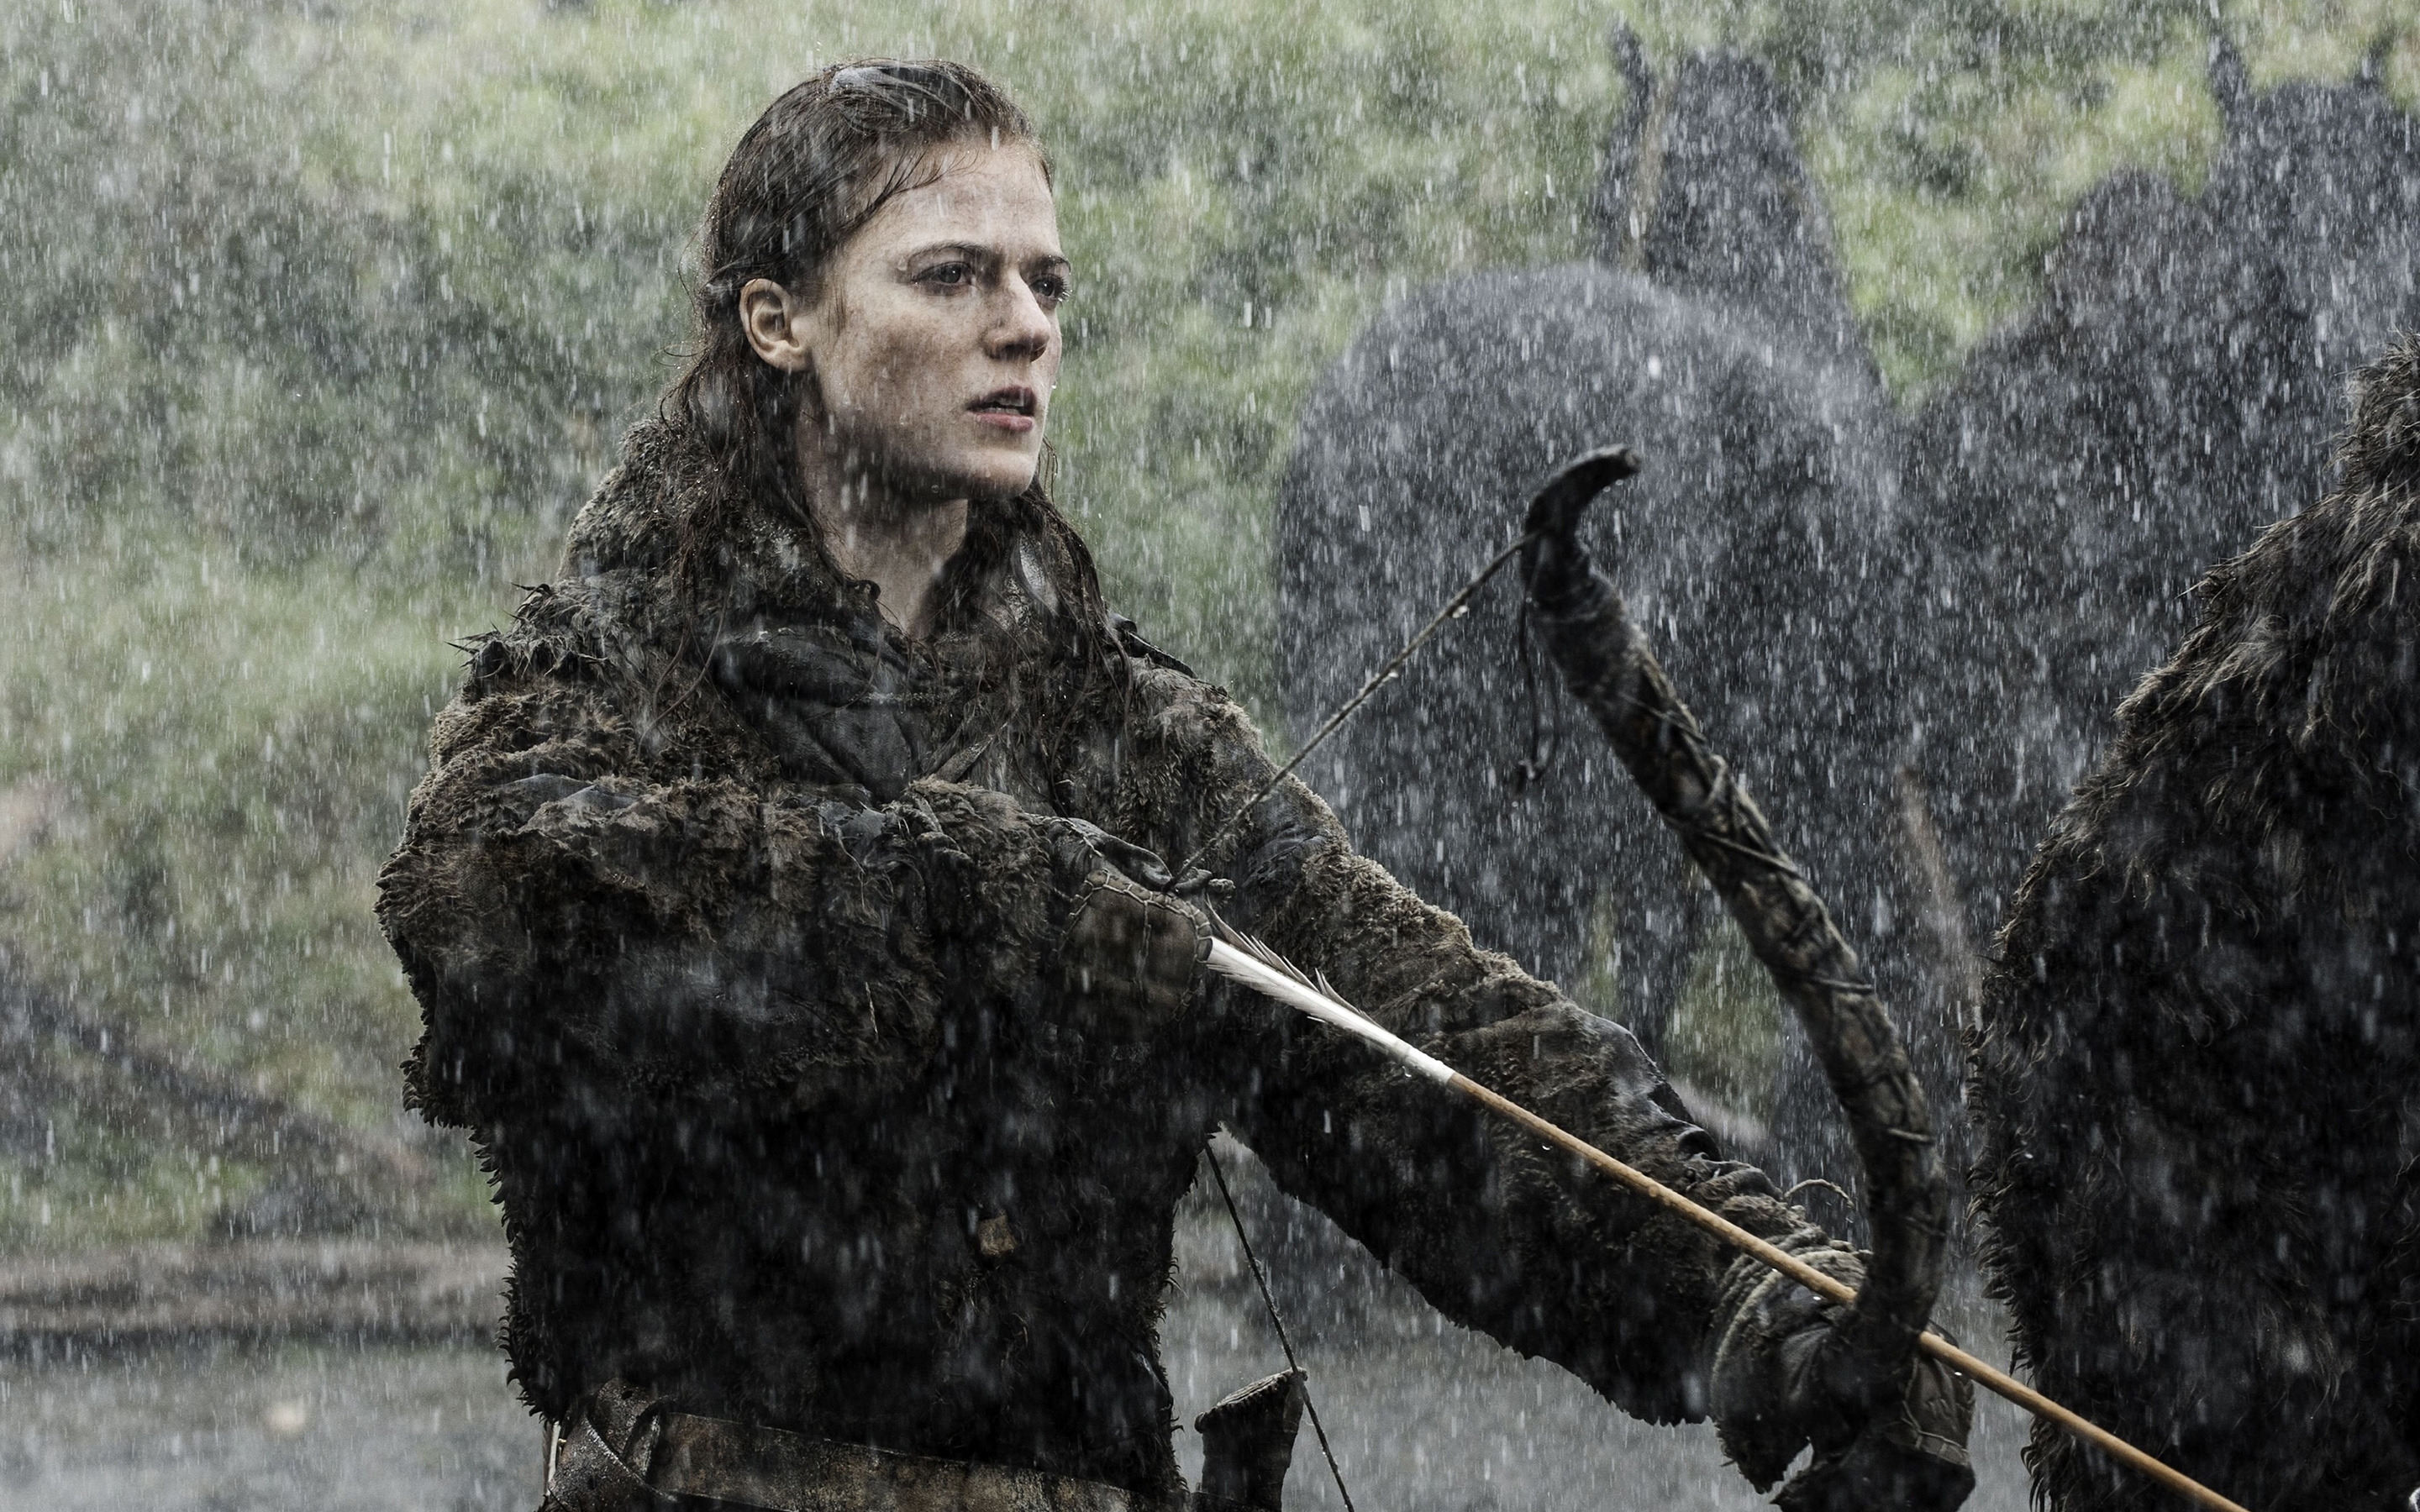 Ygritte from Game of Thrones for 2880 x 1800 Retina Display resolution